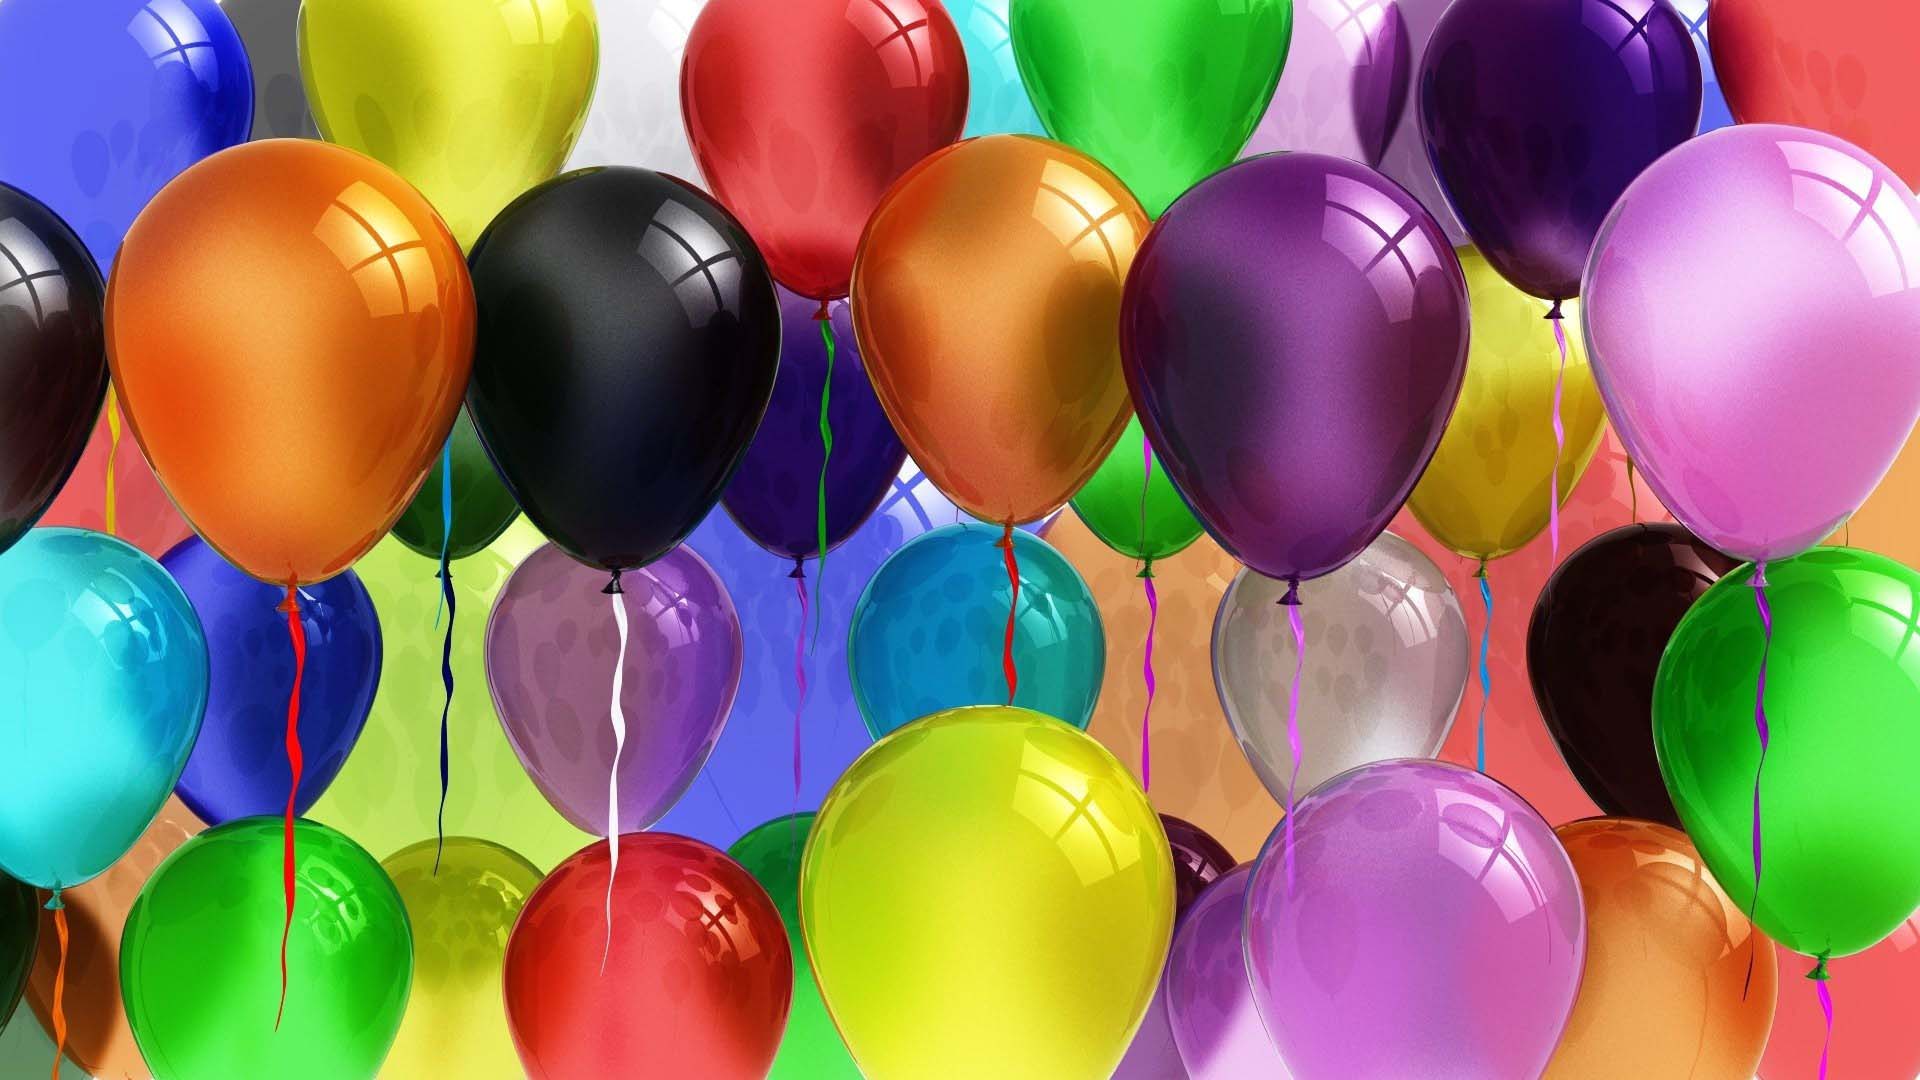 Birthday Balloons Colorful Wallpaper for free